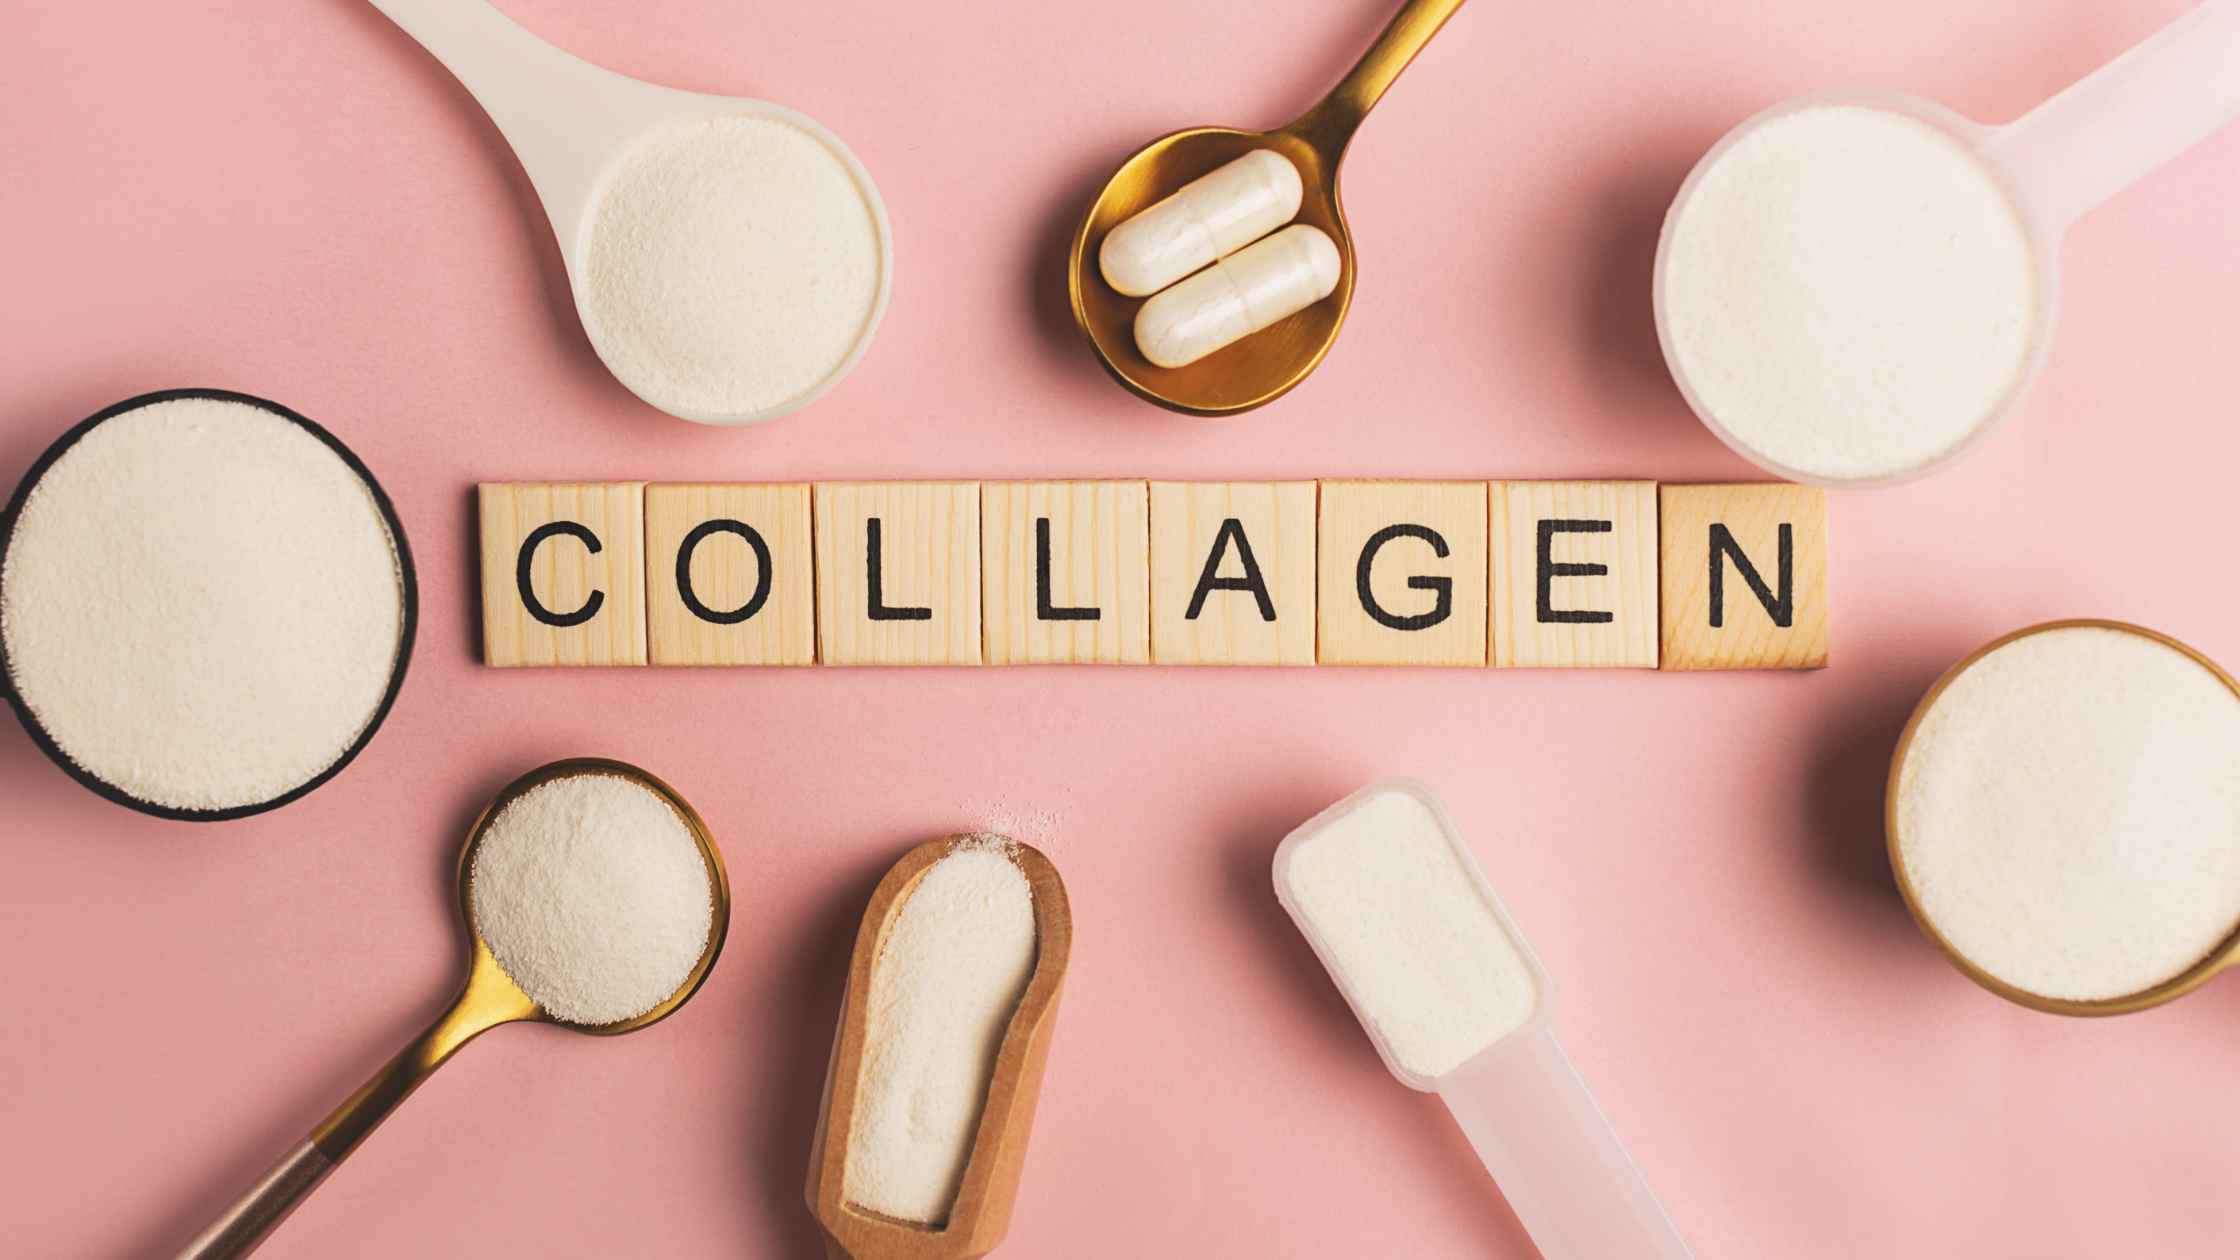 Flatlay image of collagen vs. gelatin supplements what's the difference?